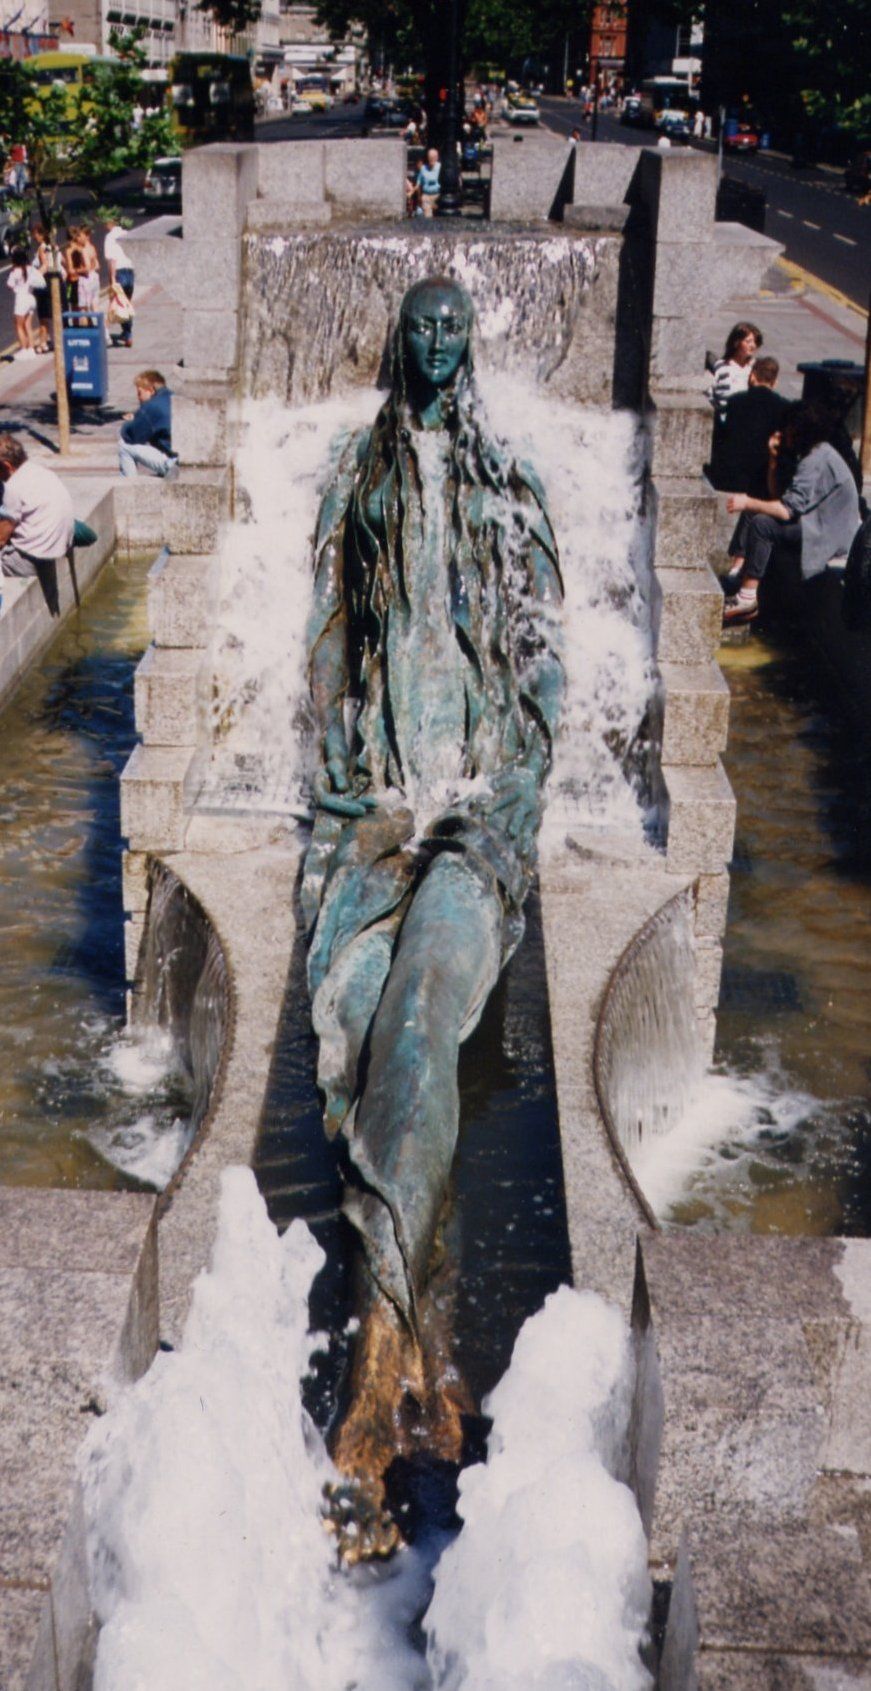 A photograph of the statue of Anna Livia (ALP) in its original location